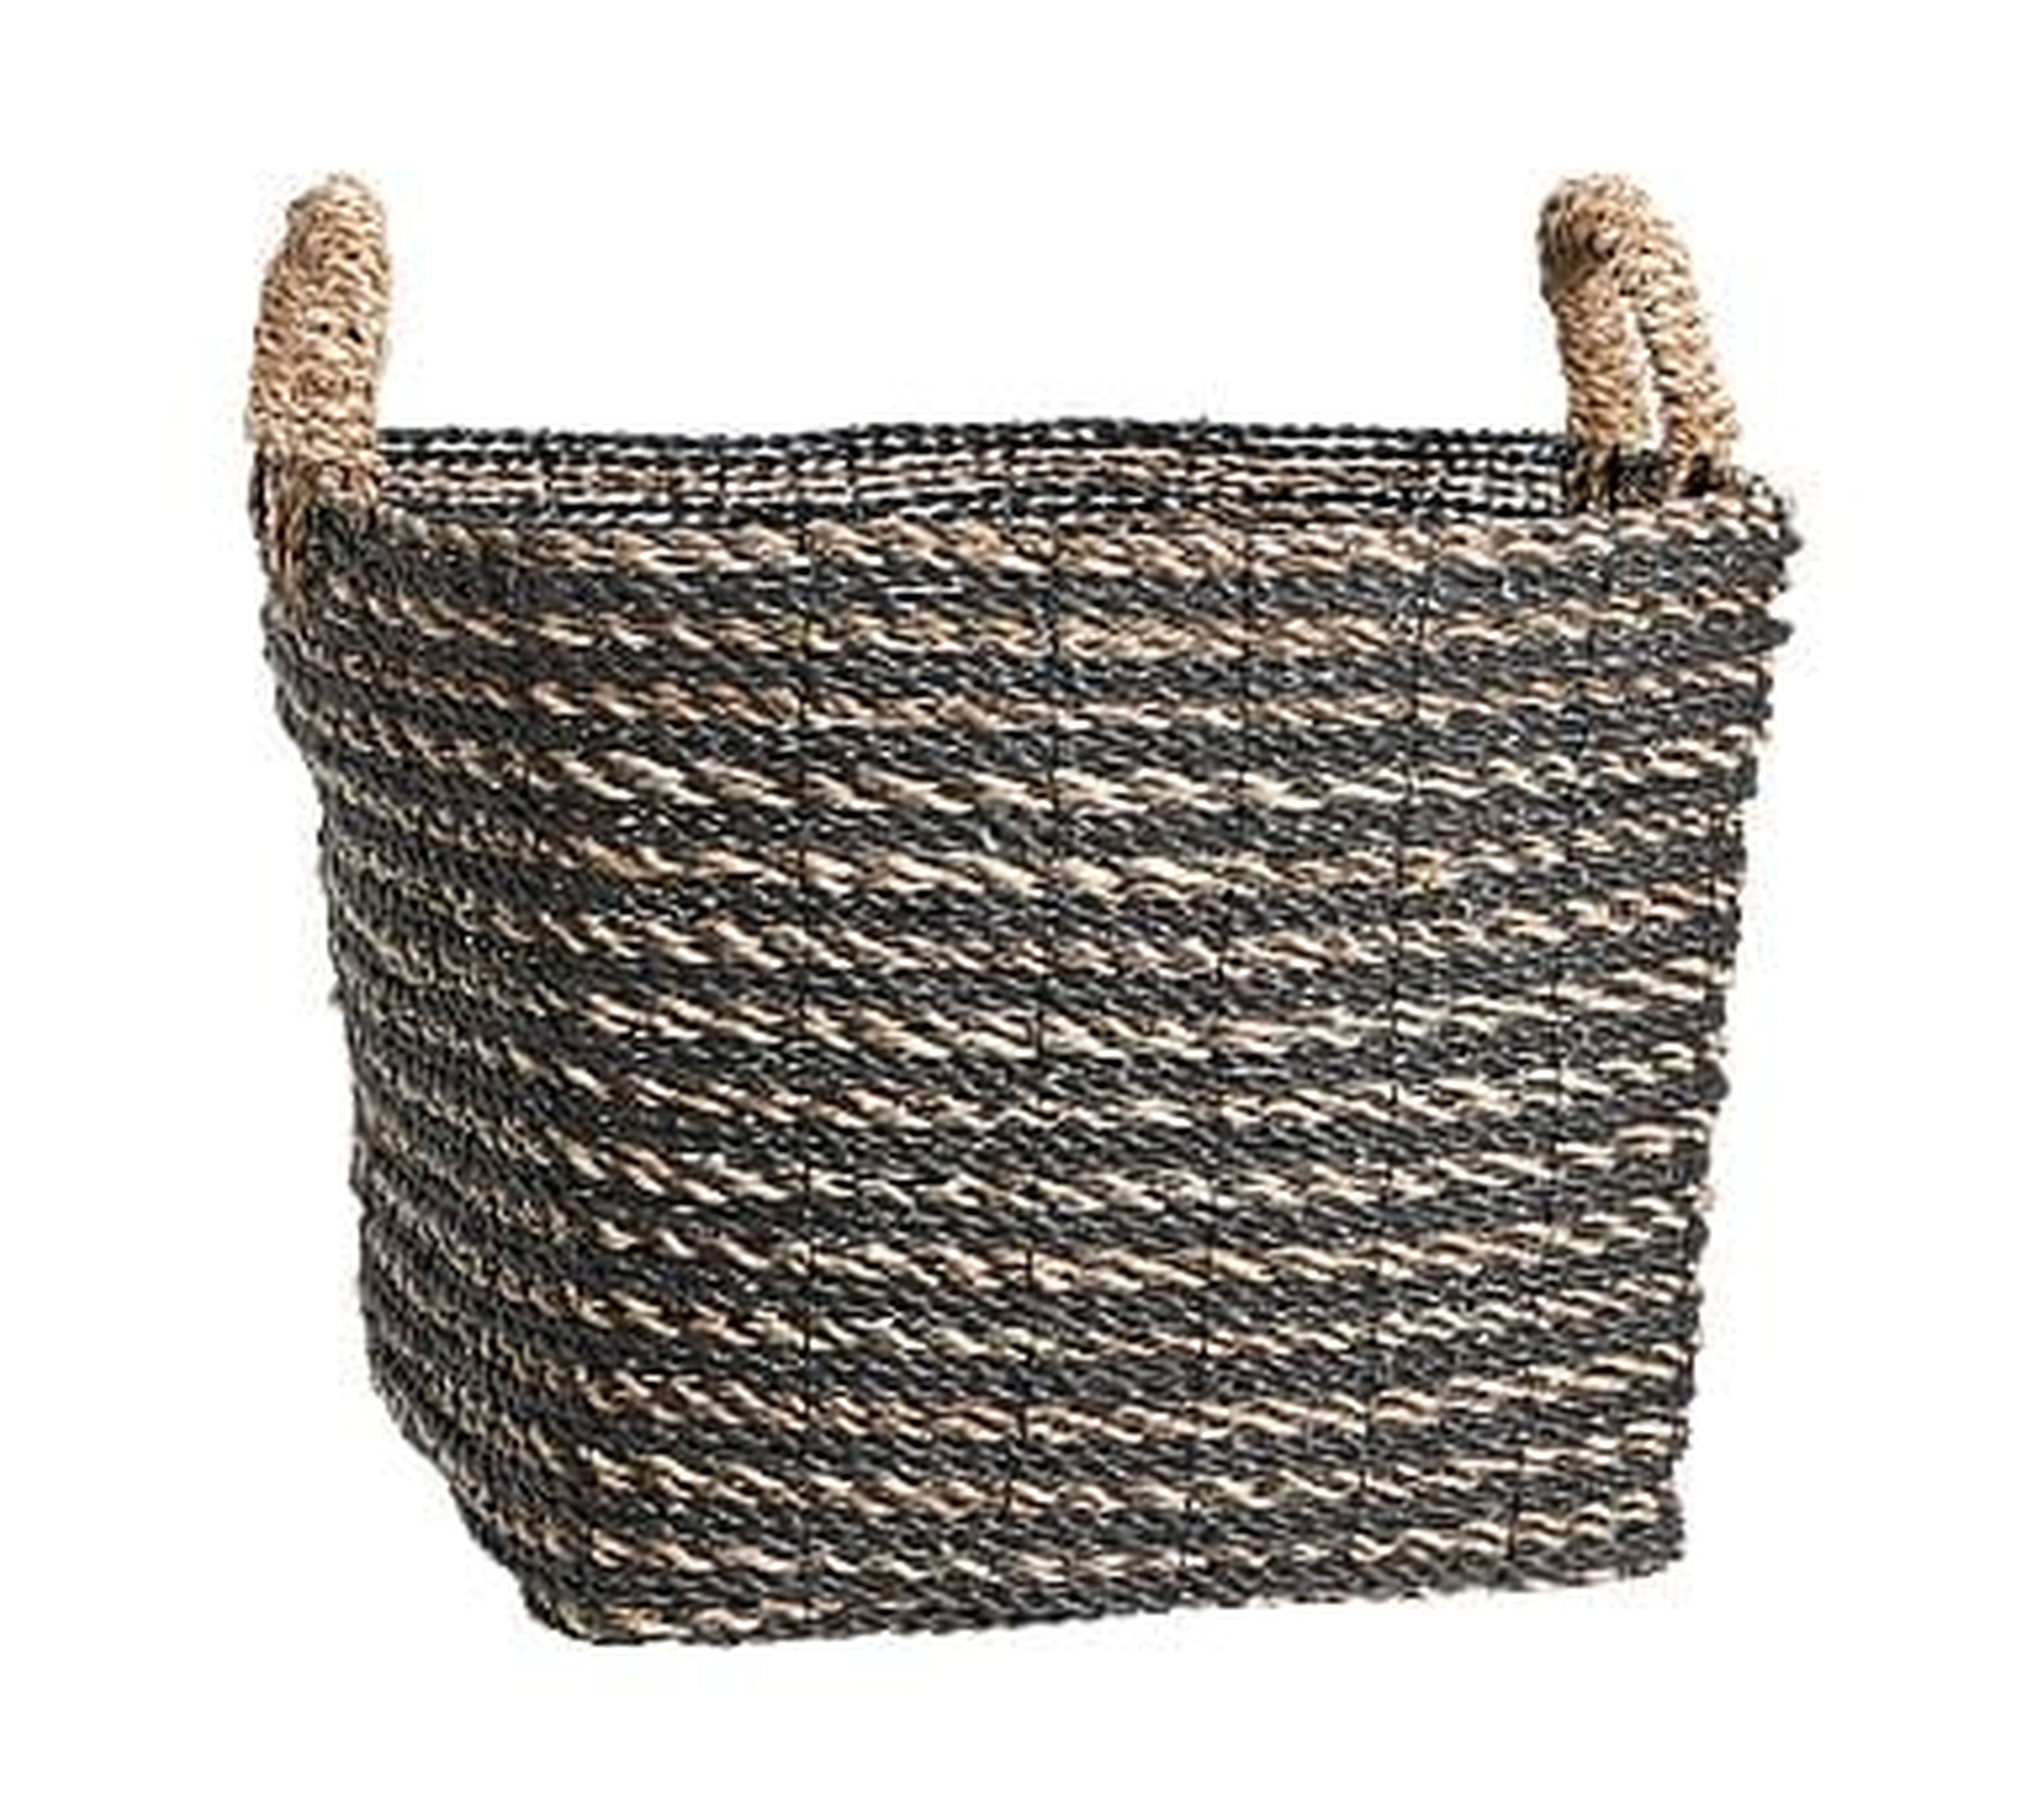 Asher Utility Basket, Charcoal/Natural - Pottery Barn